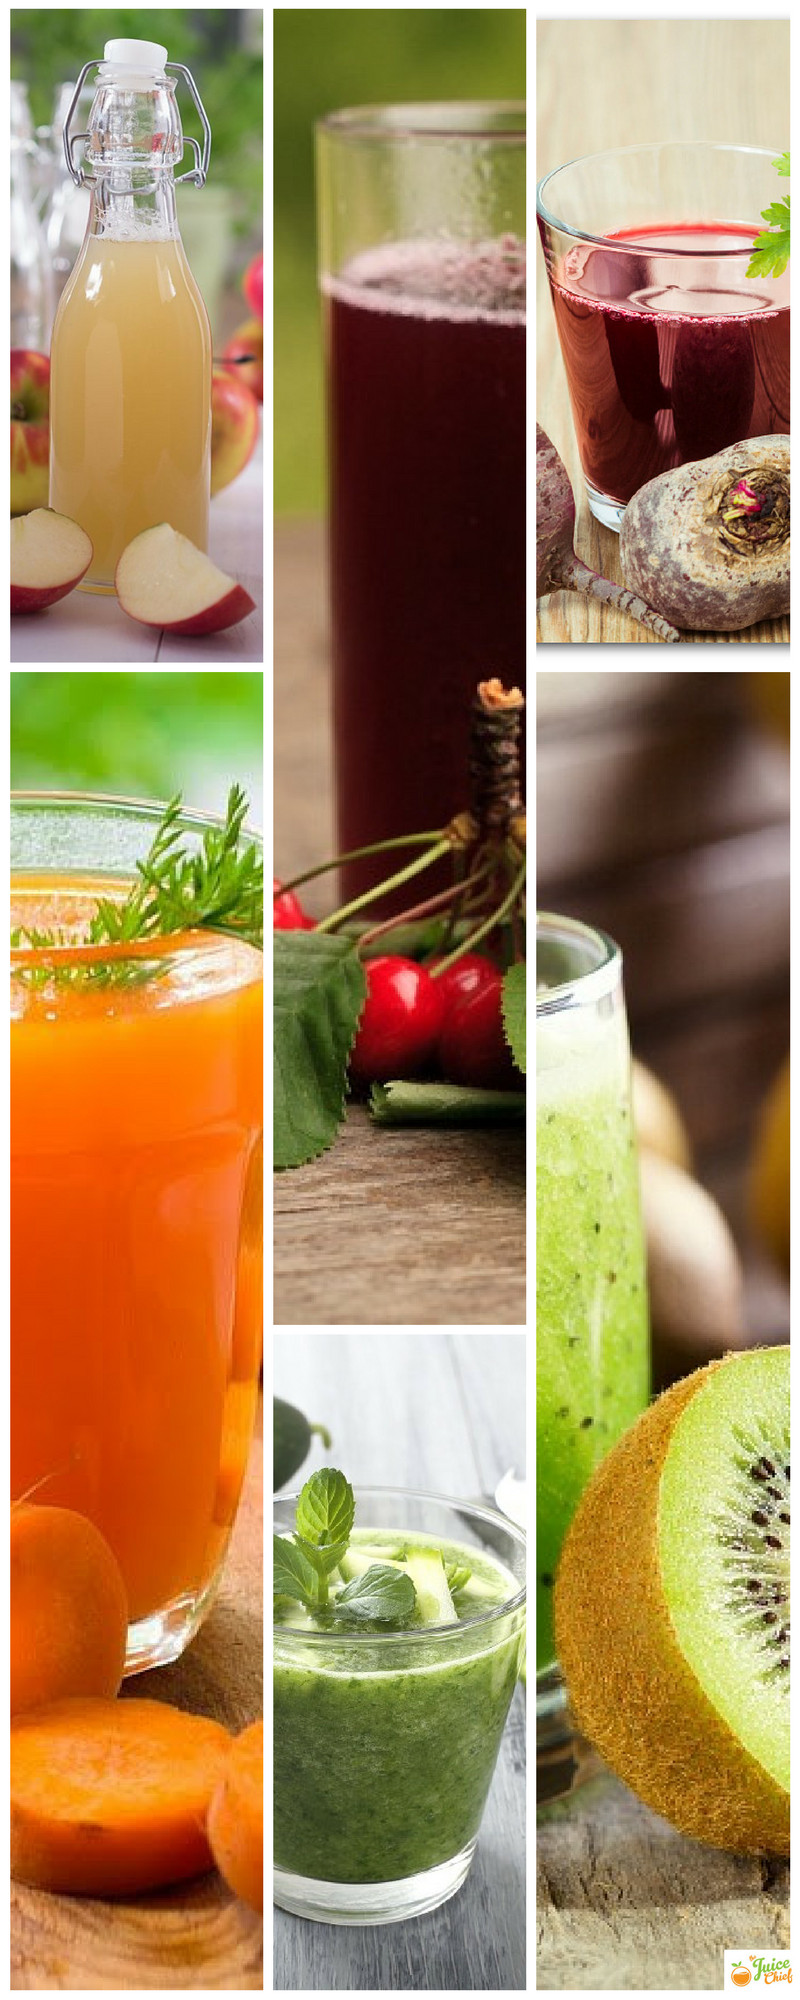 Fruit And Vegetable Juice Recipes For Weight Loss
 A Site For All Juicing Lovers